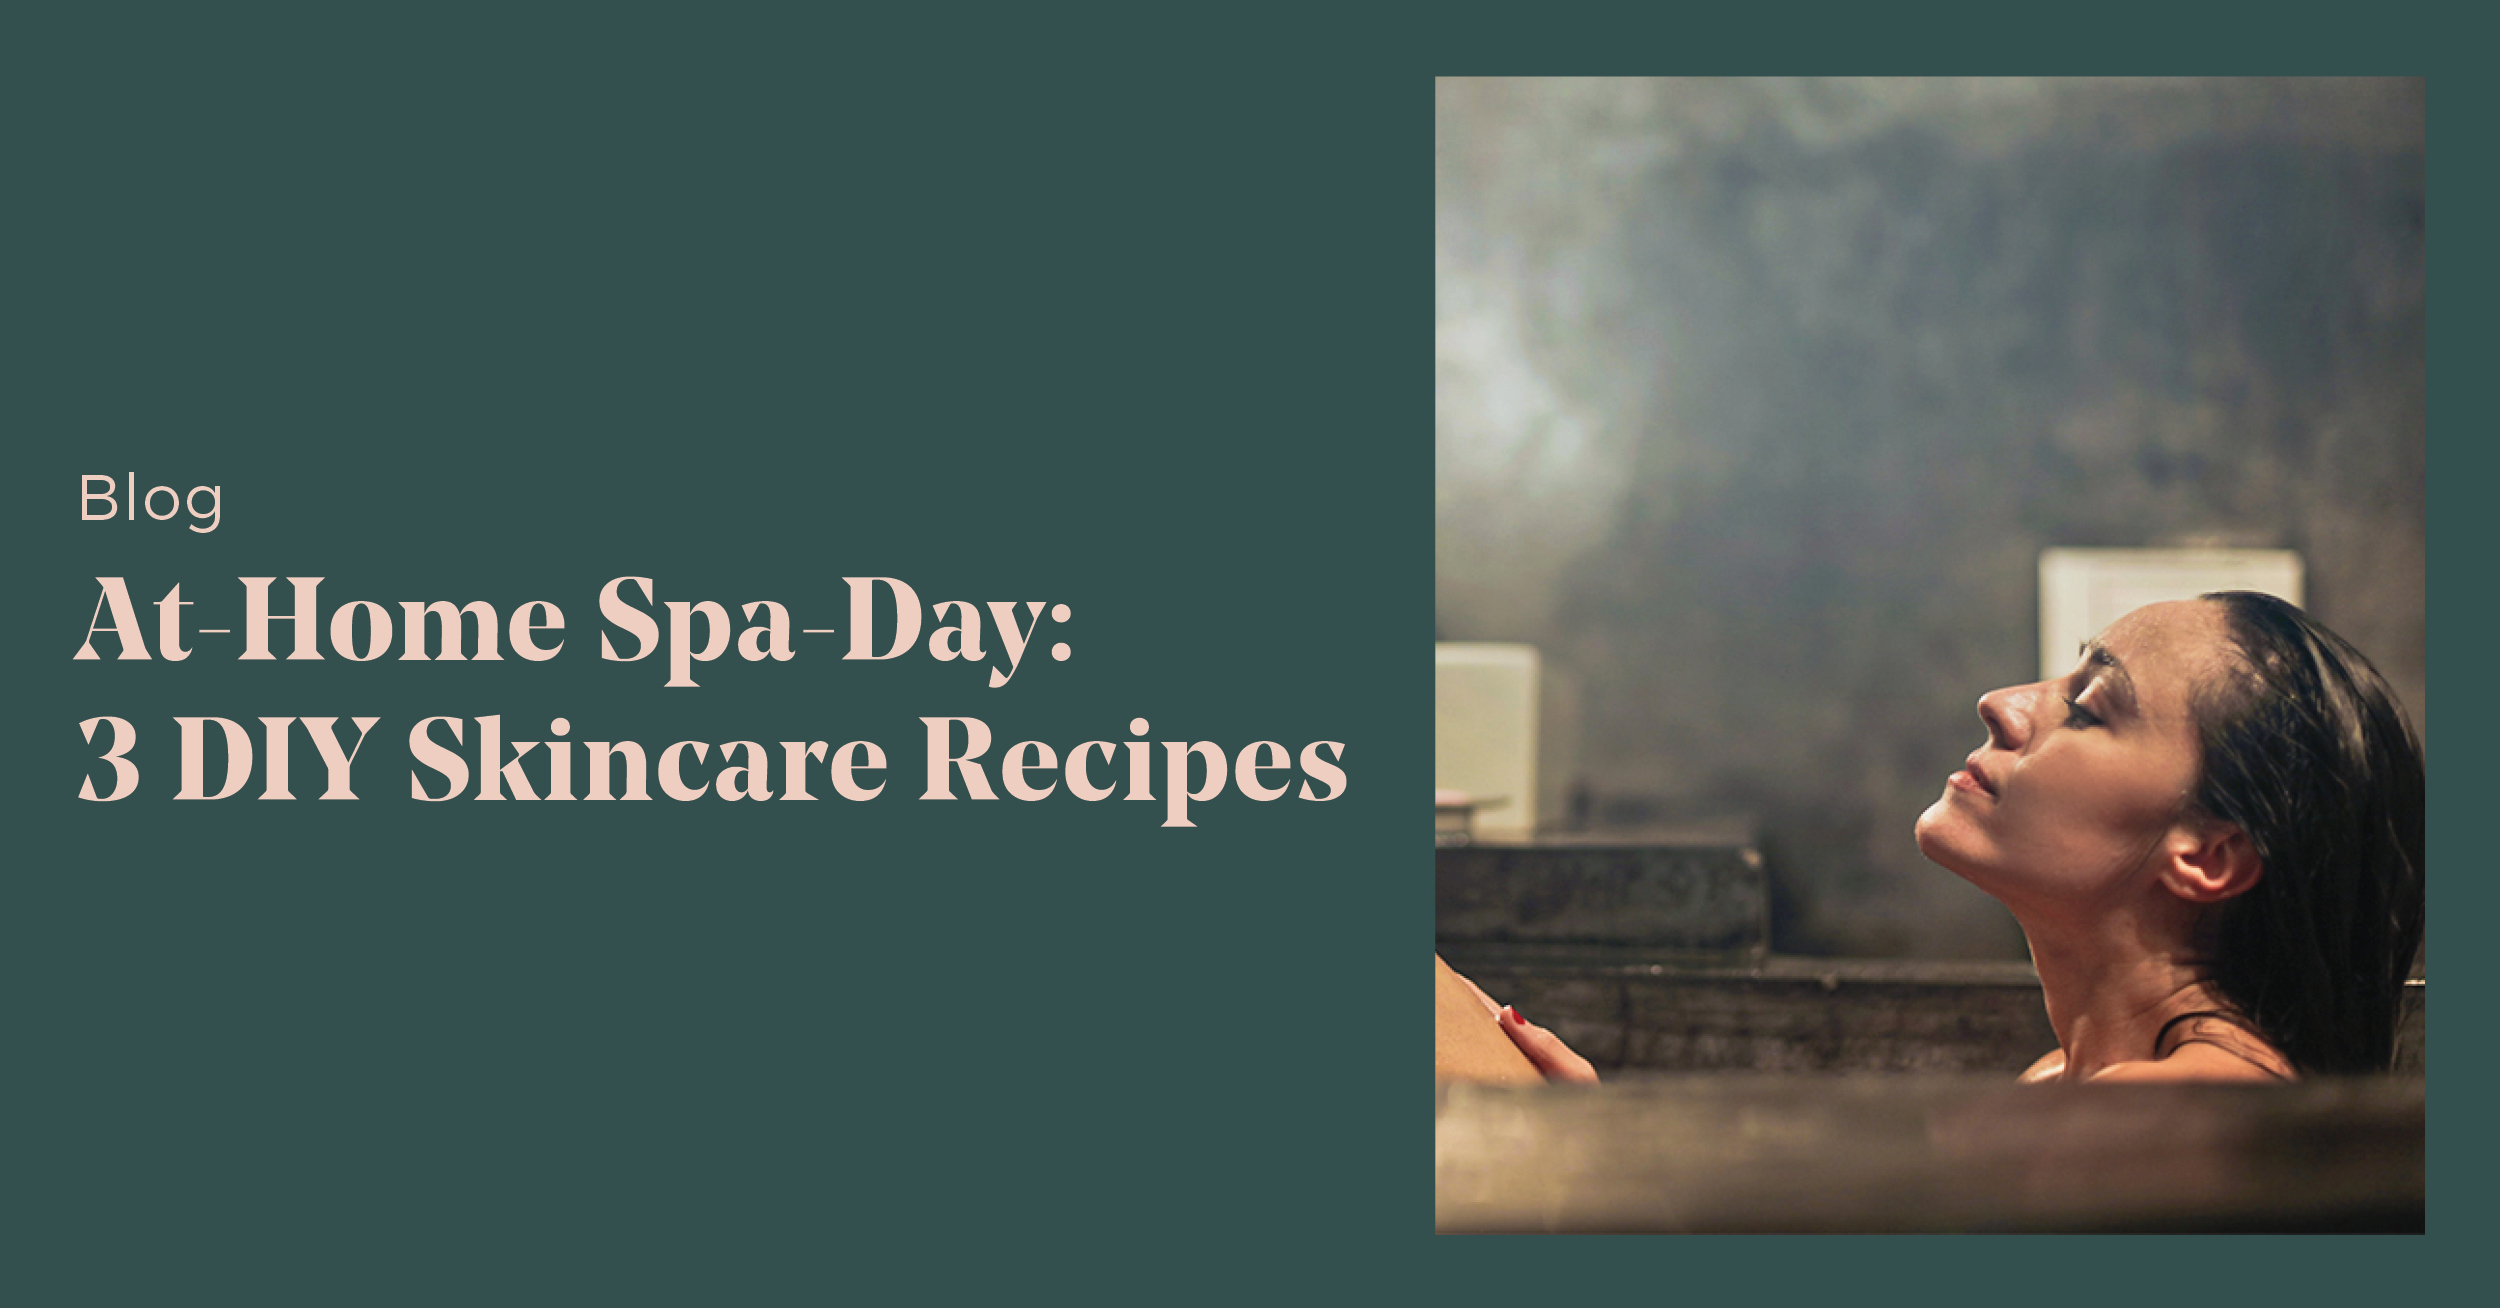 Spa from Home: DIY Recipes for At-Home Skincare